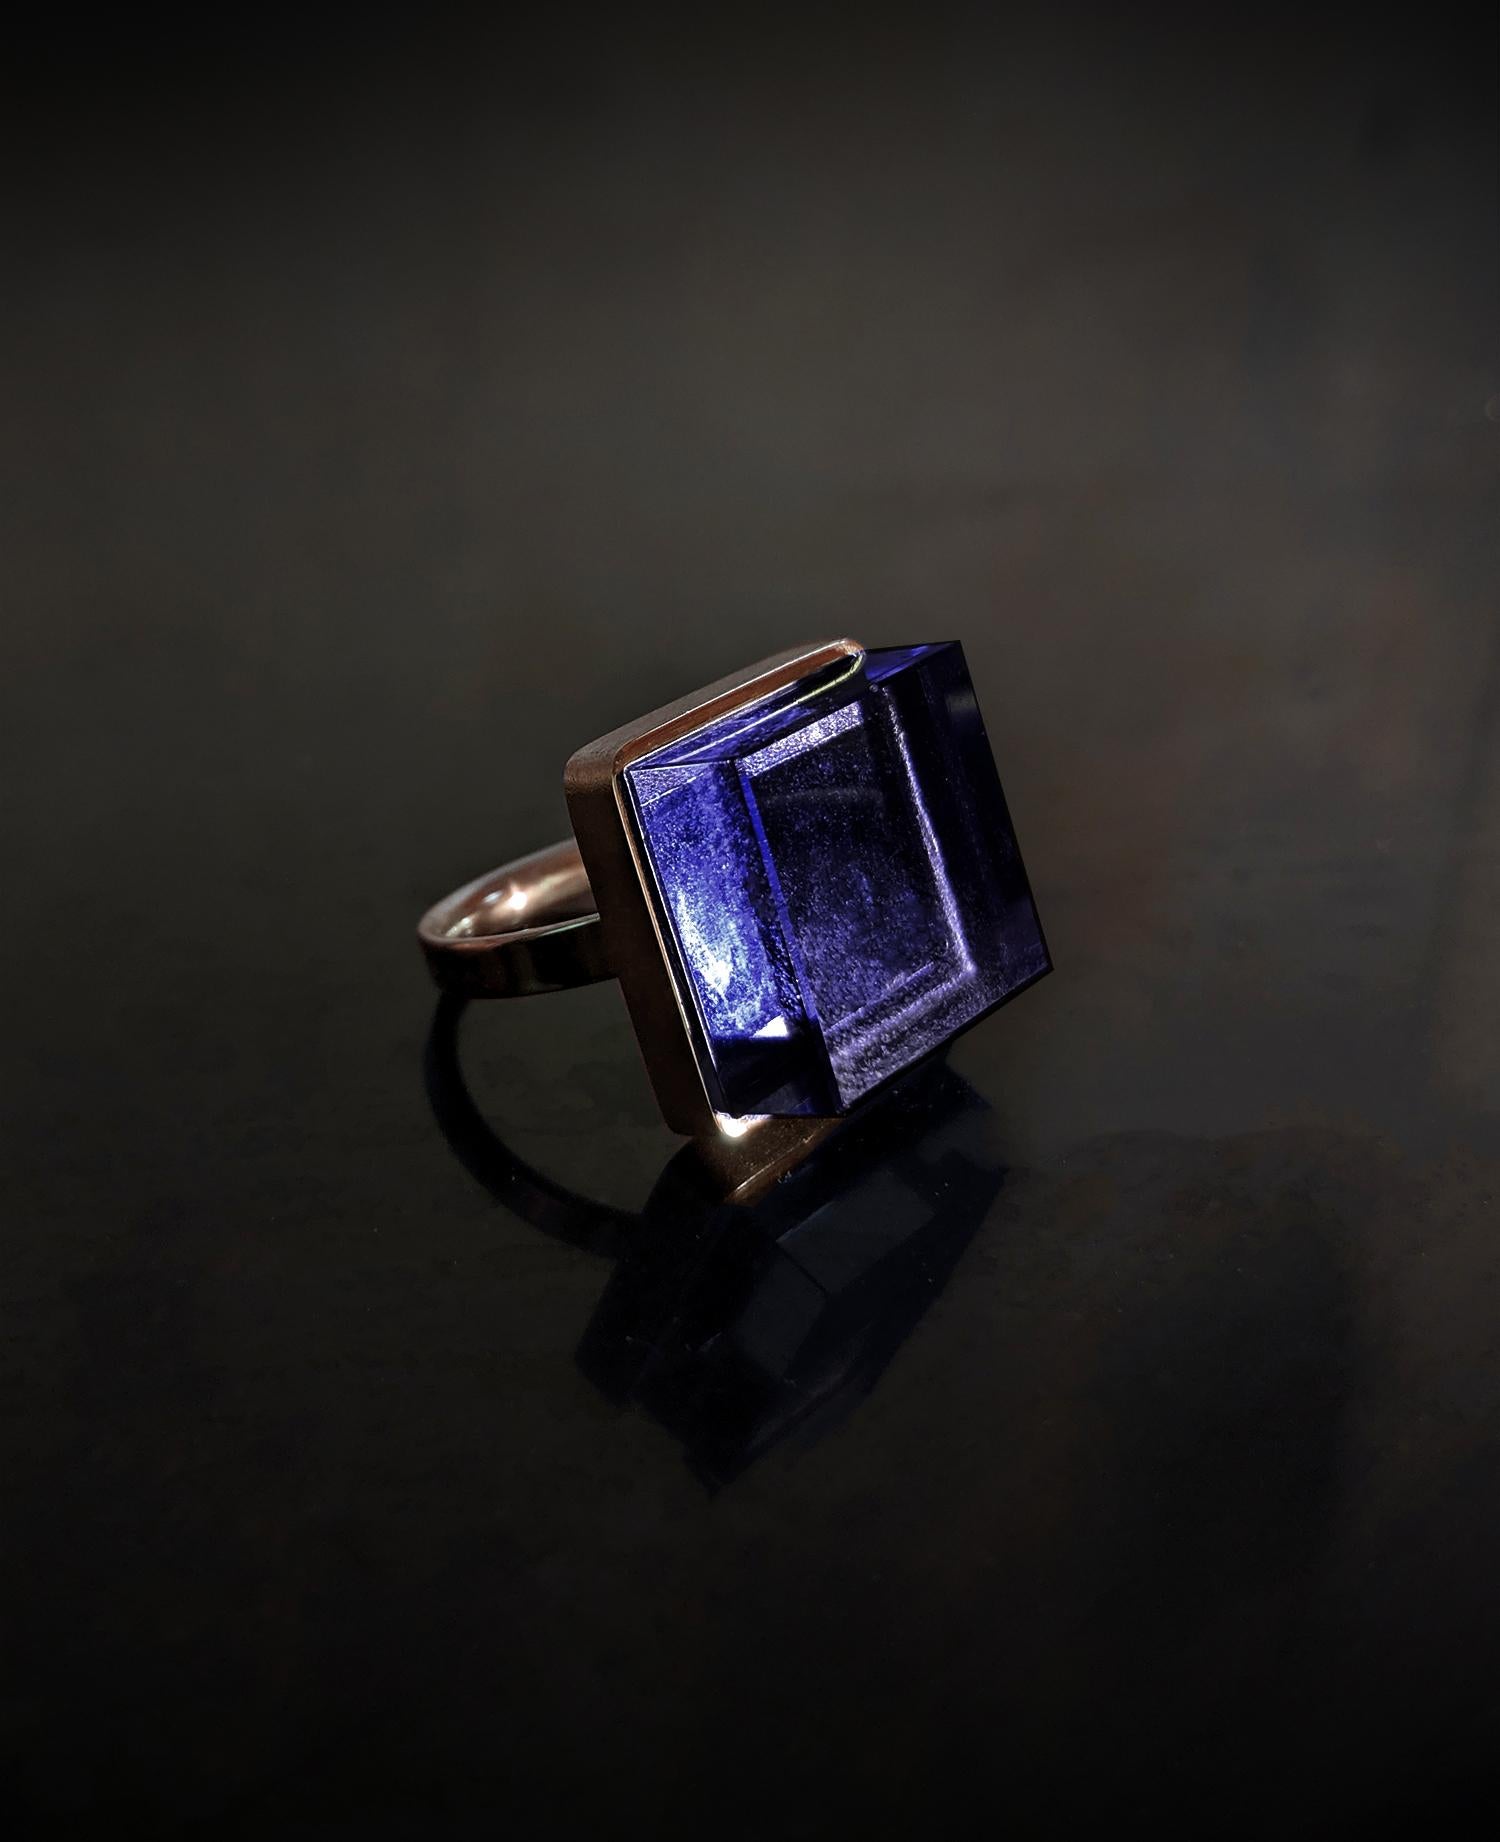 This cocktail ring is in 18 karat yellow gold with 15x15x8 mm grown dark vivid amethyst. It was published in Harper's Bazaar and Vogue UA. 

The ring reflects the art deco spirit and fits to women and men. It inspires the architects, designers and